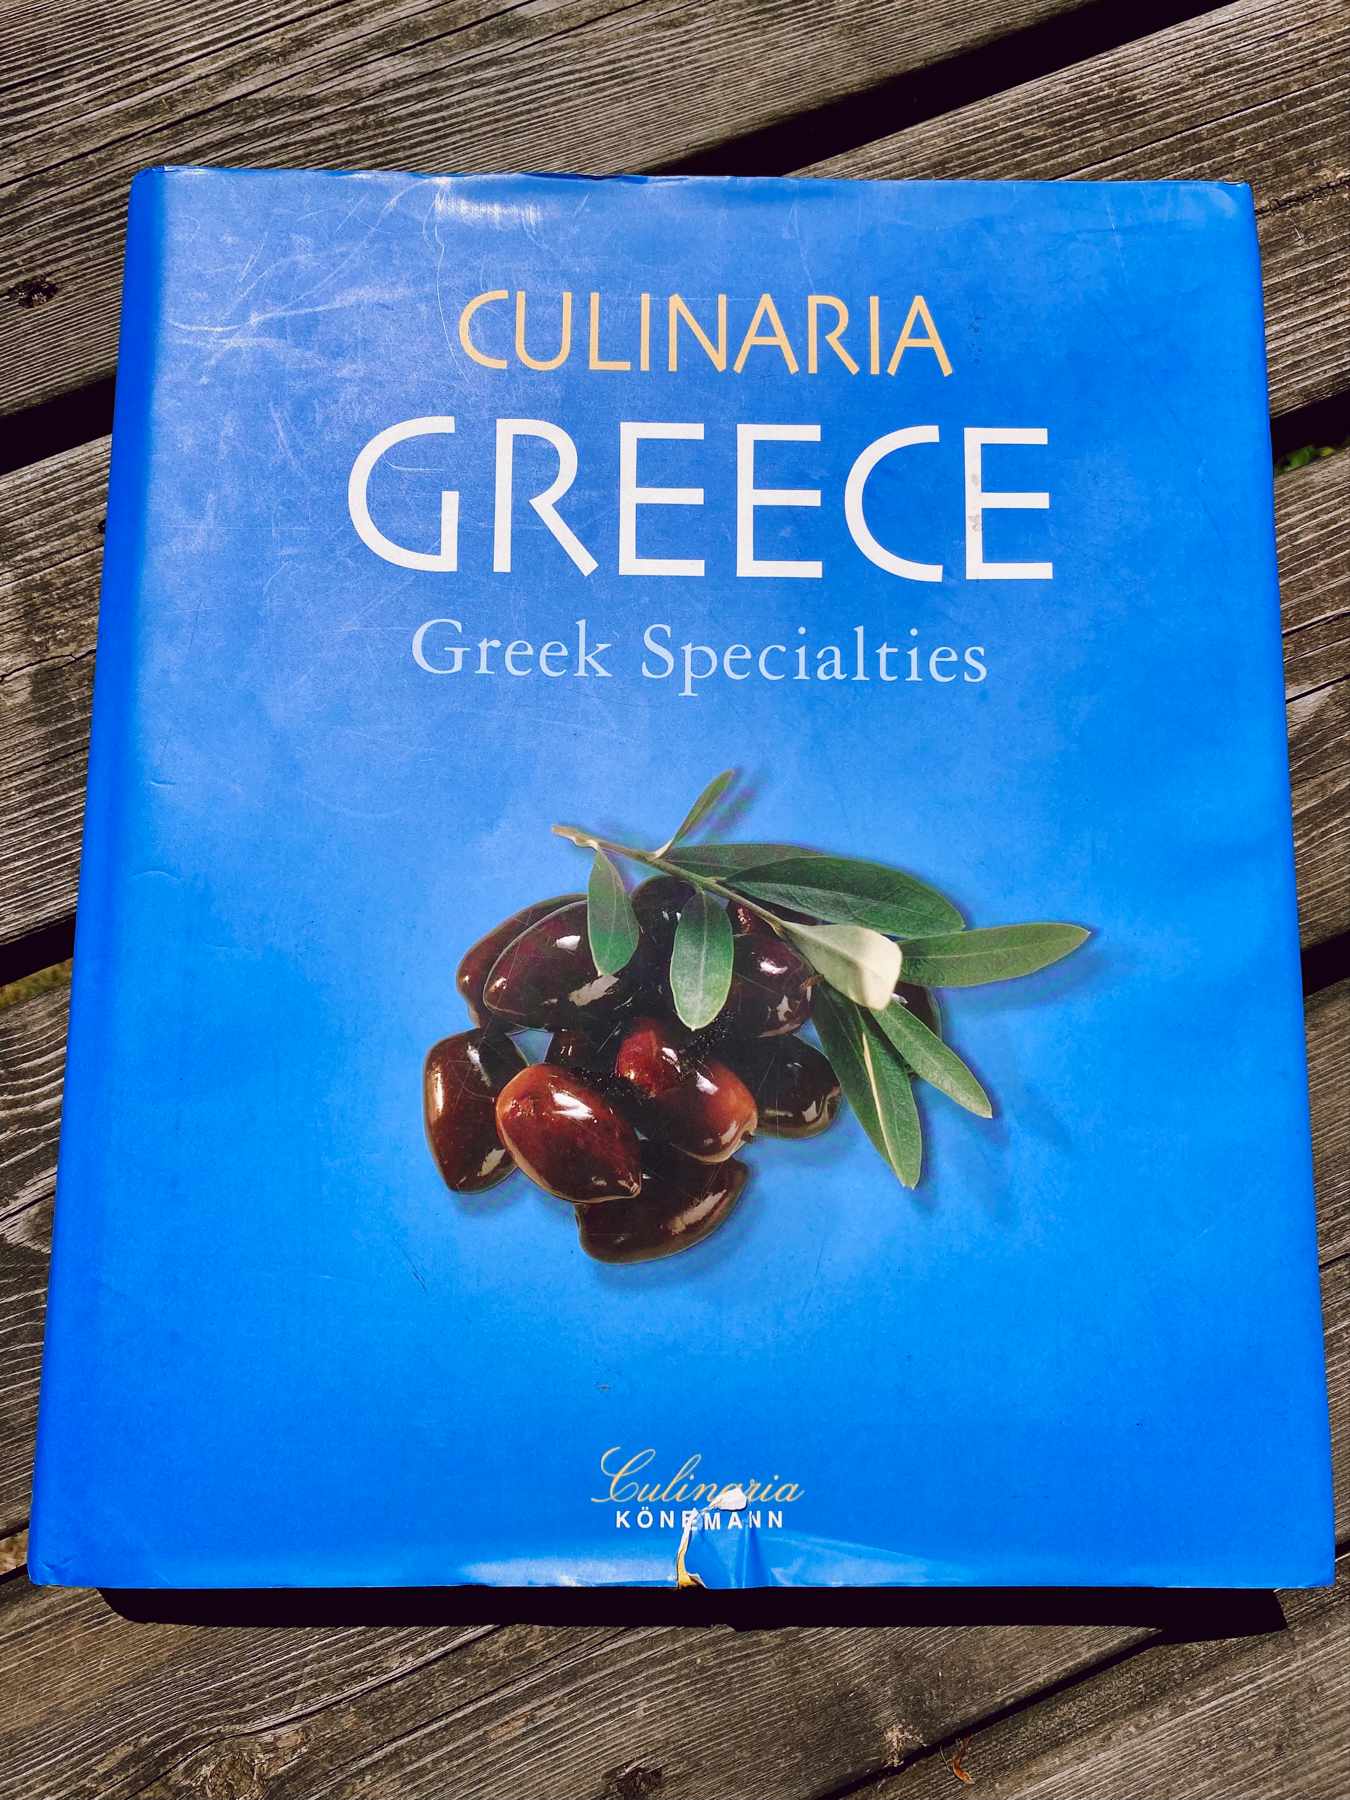 Cover of Greek cookery books. Olives and olive leaves on a vibrant blue background